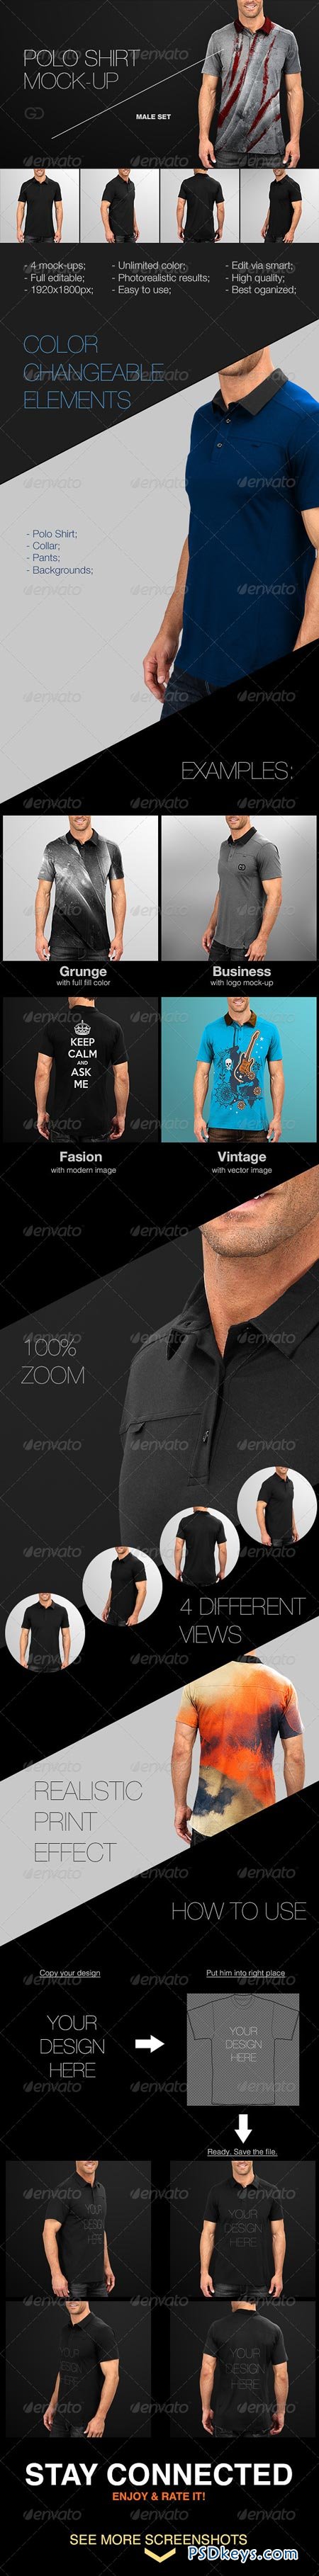 Download Mens Polo Shirt Mock-Up 7734860 » Free Download Photoshop ...